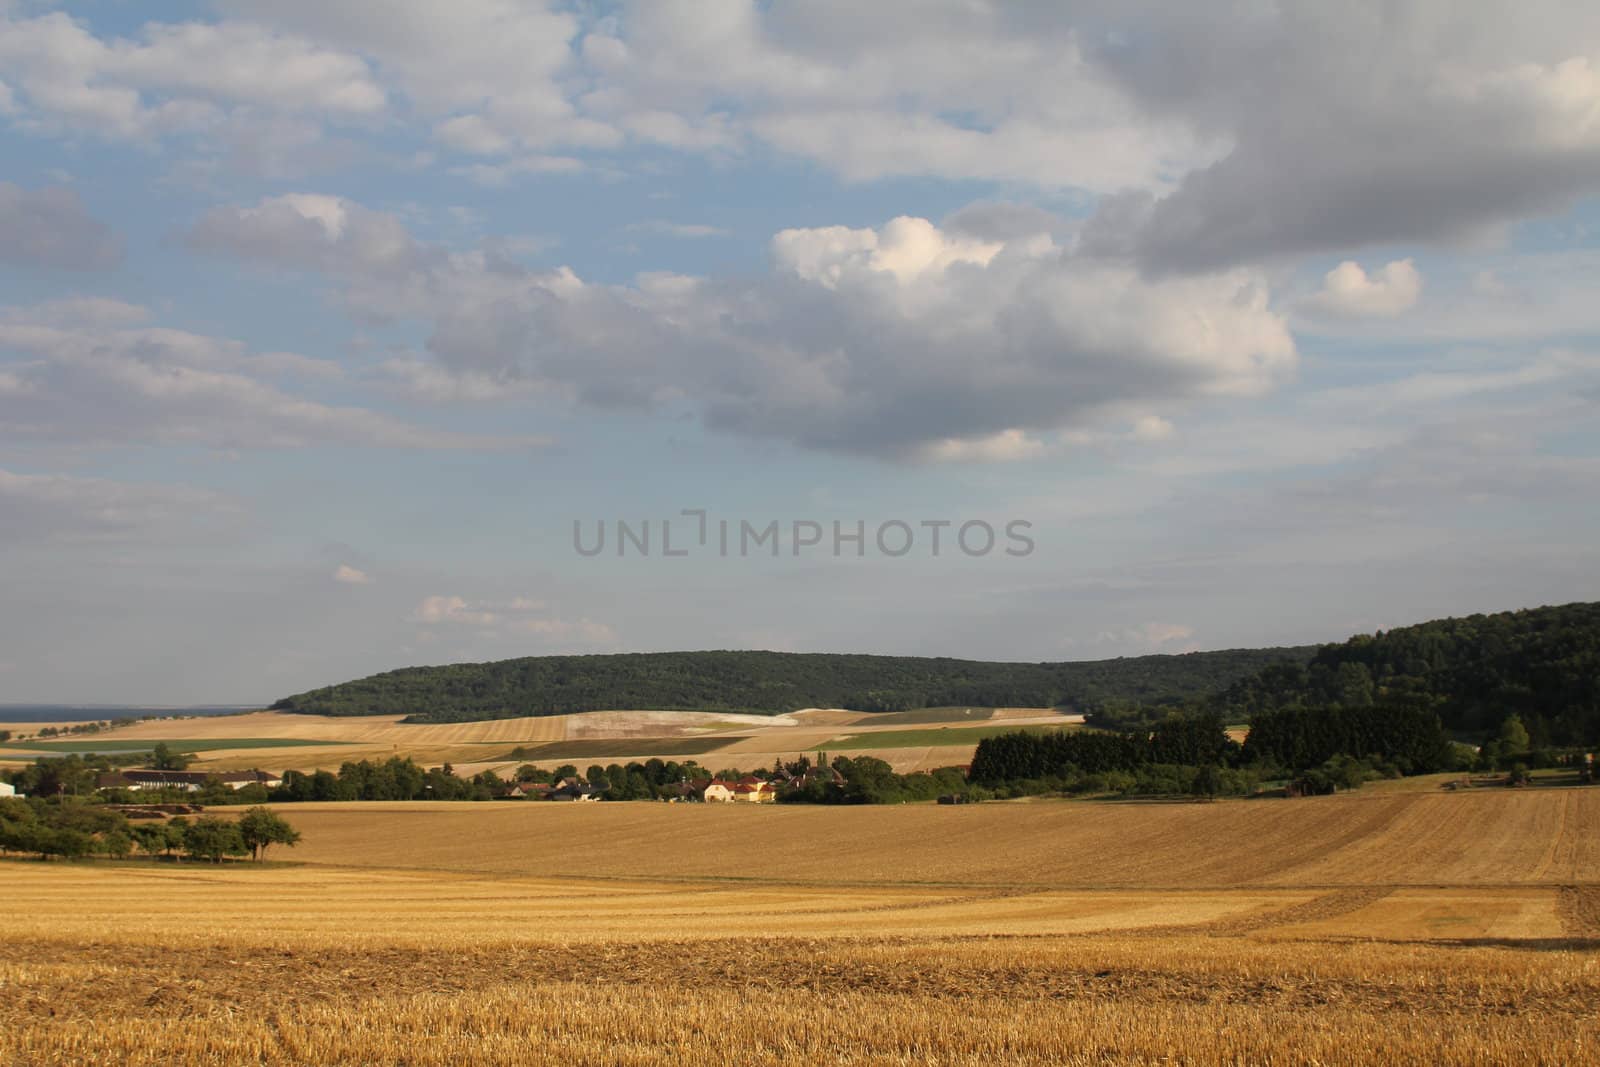 Panorama of northern French countryside and harvested wheat fields
